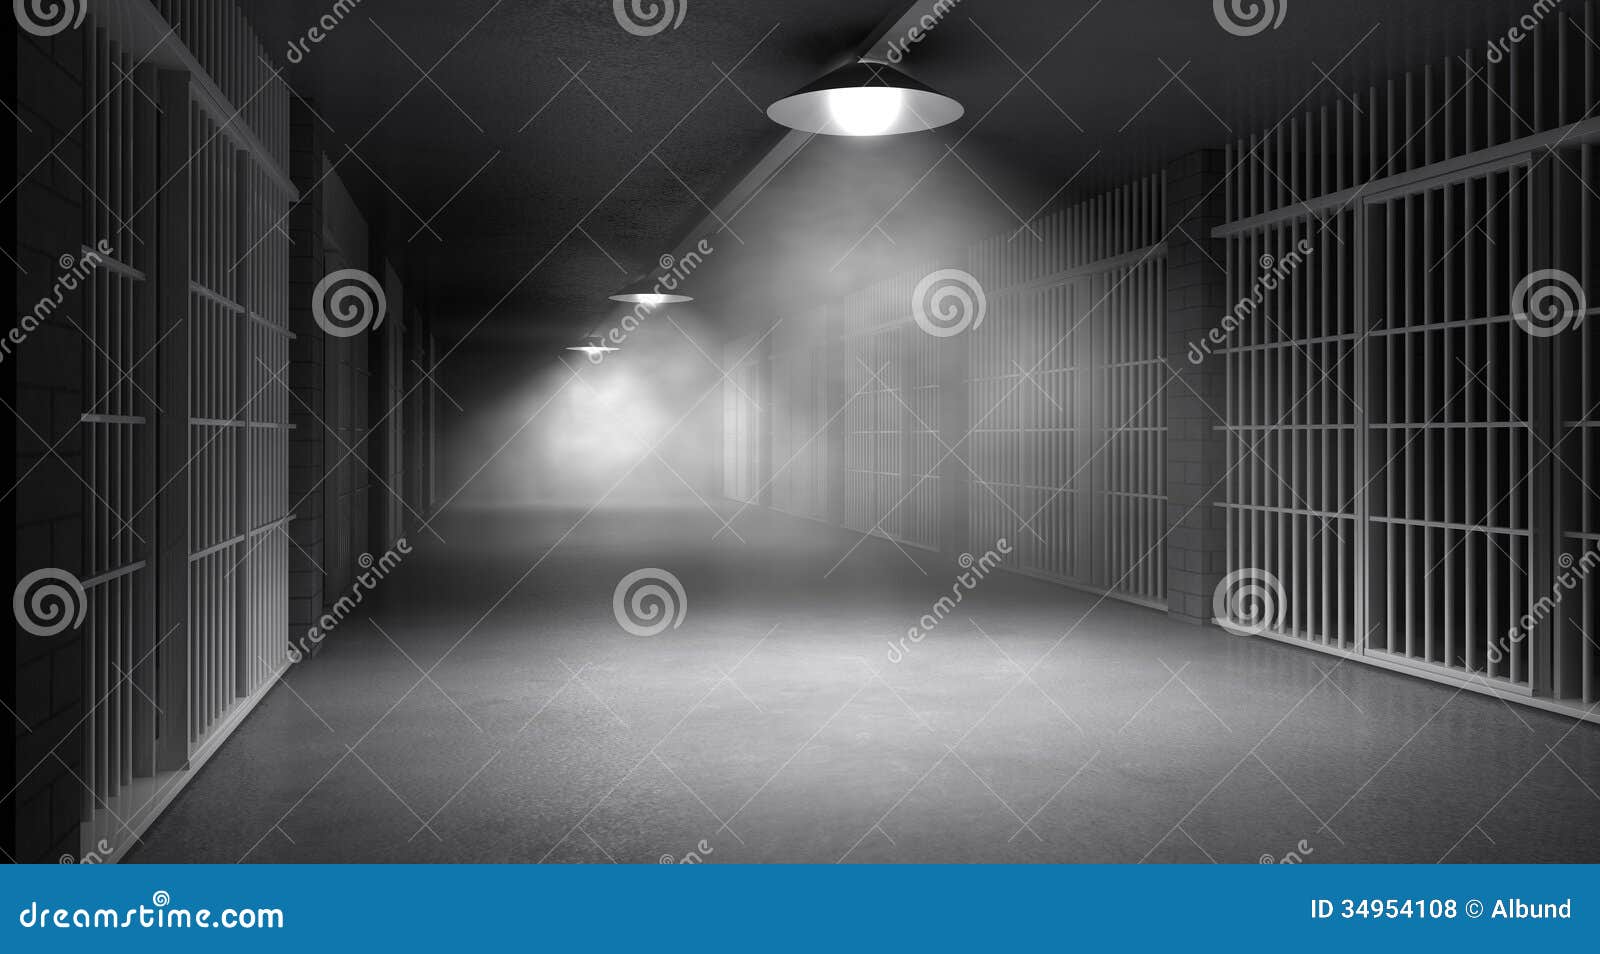 haunted jail corridor and cells